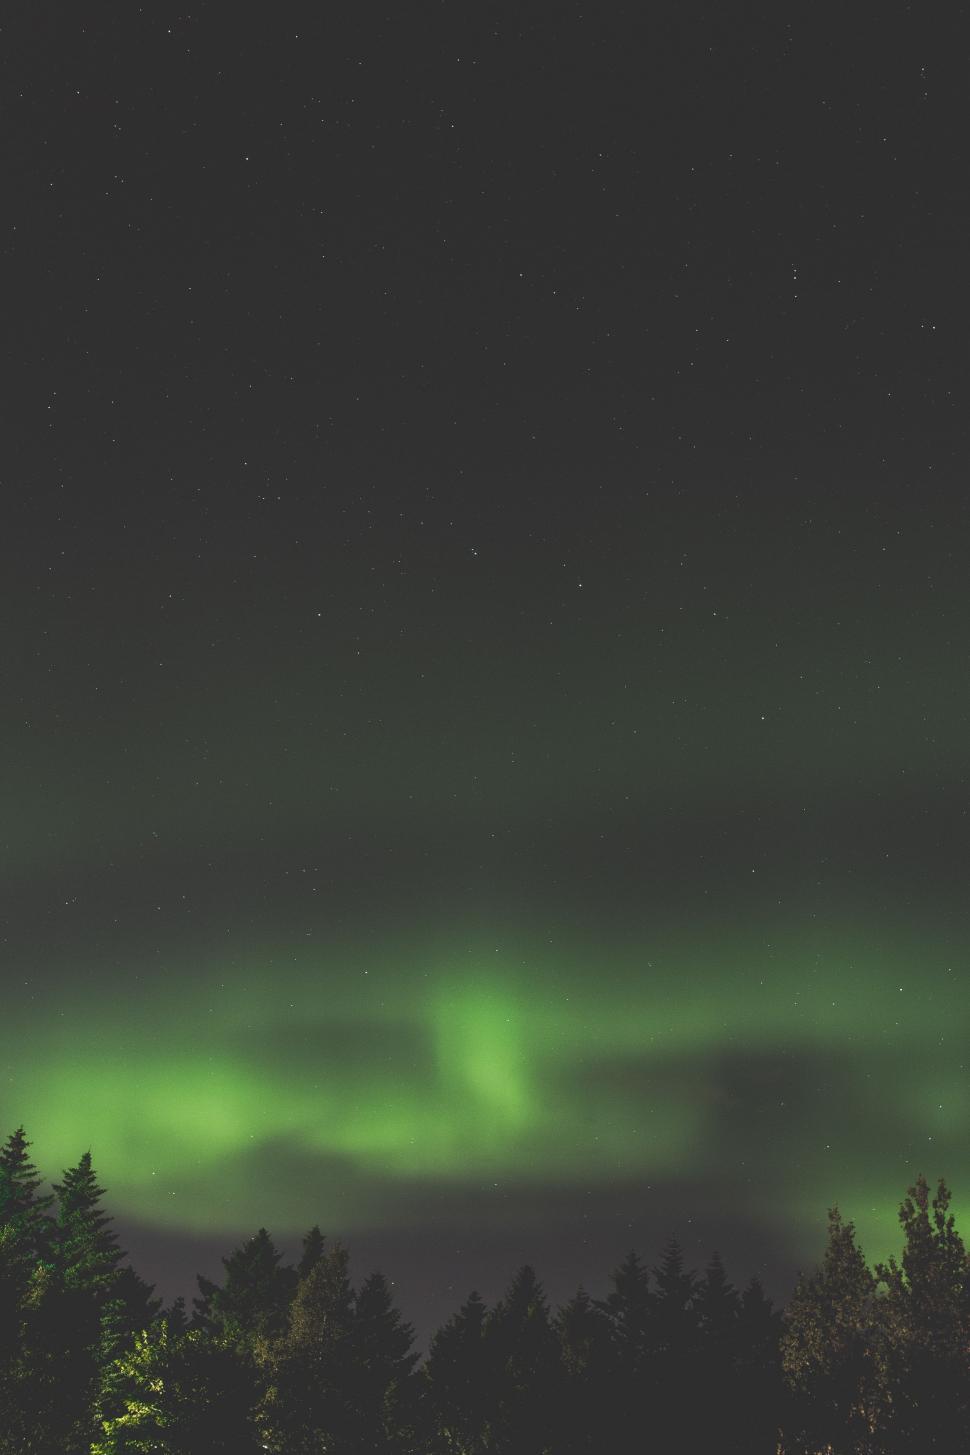 Free Image of Green and Black Aurora Bore 